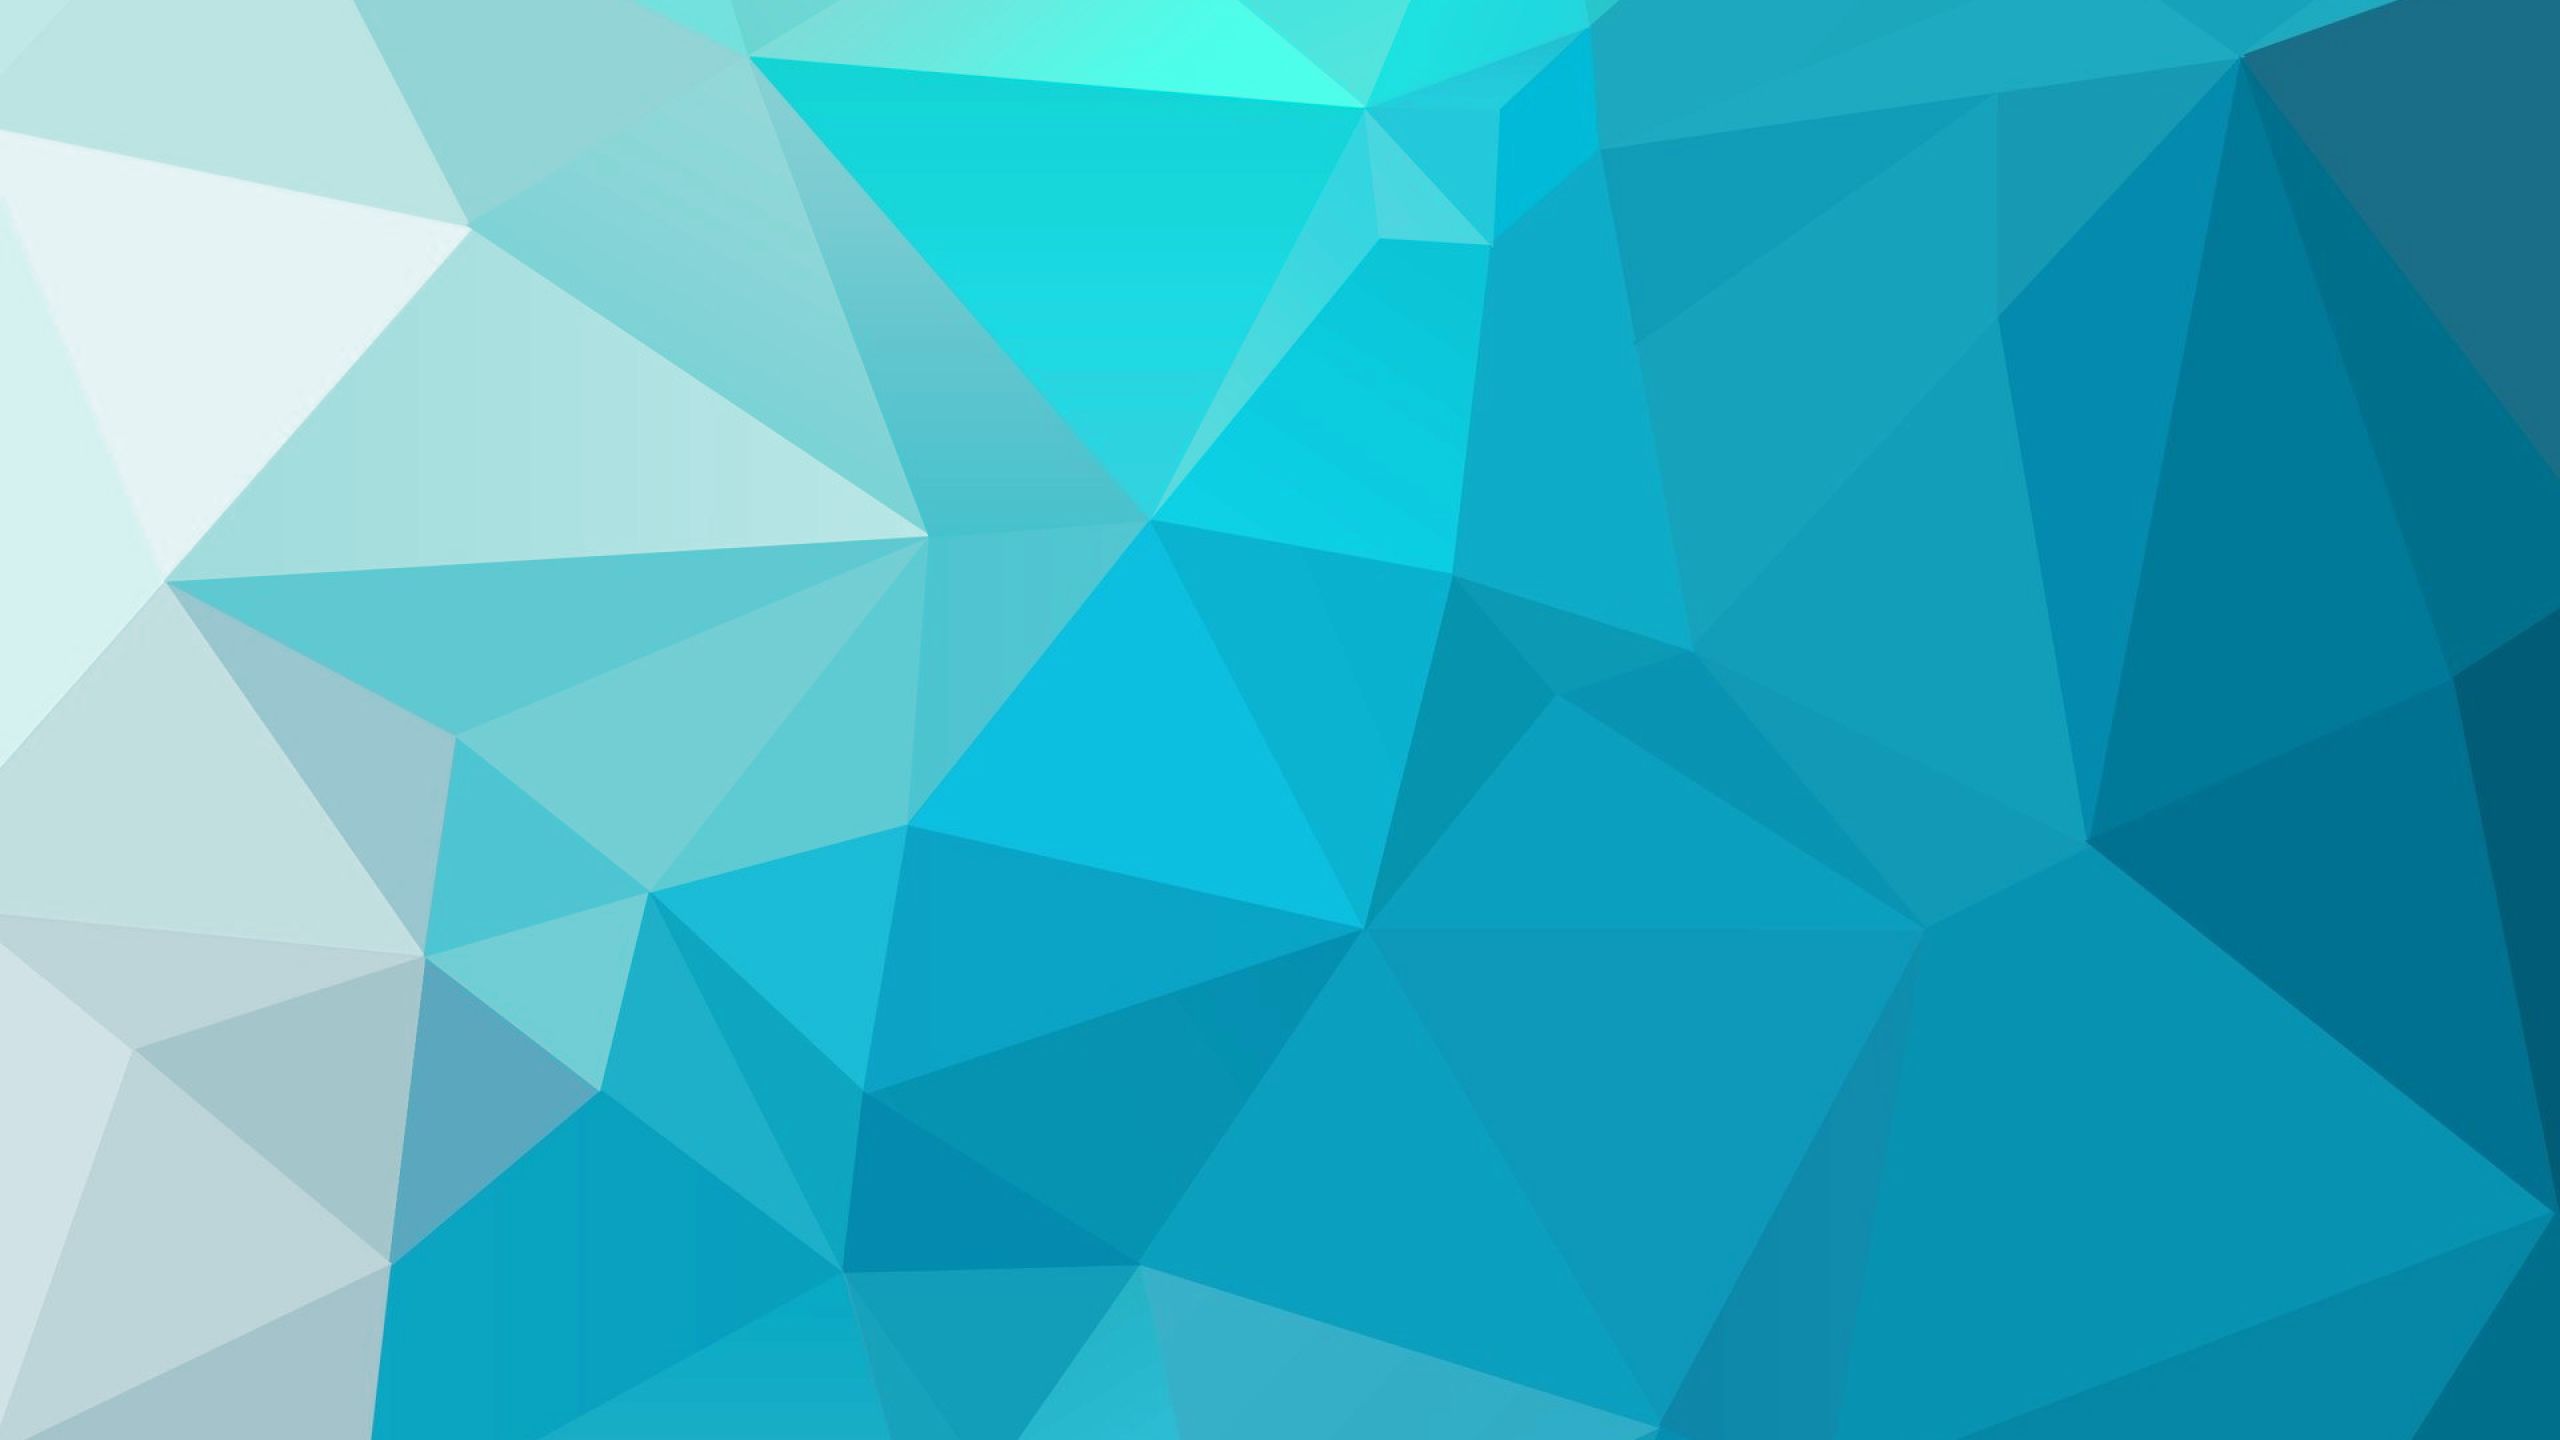 Turquoise 4K wallpaper for your desktop or mobile screen free and easy to download